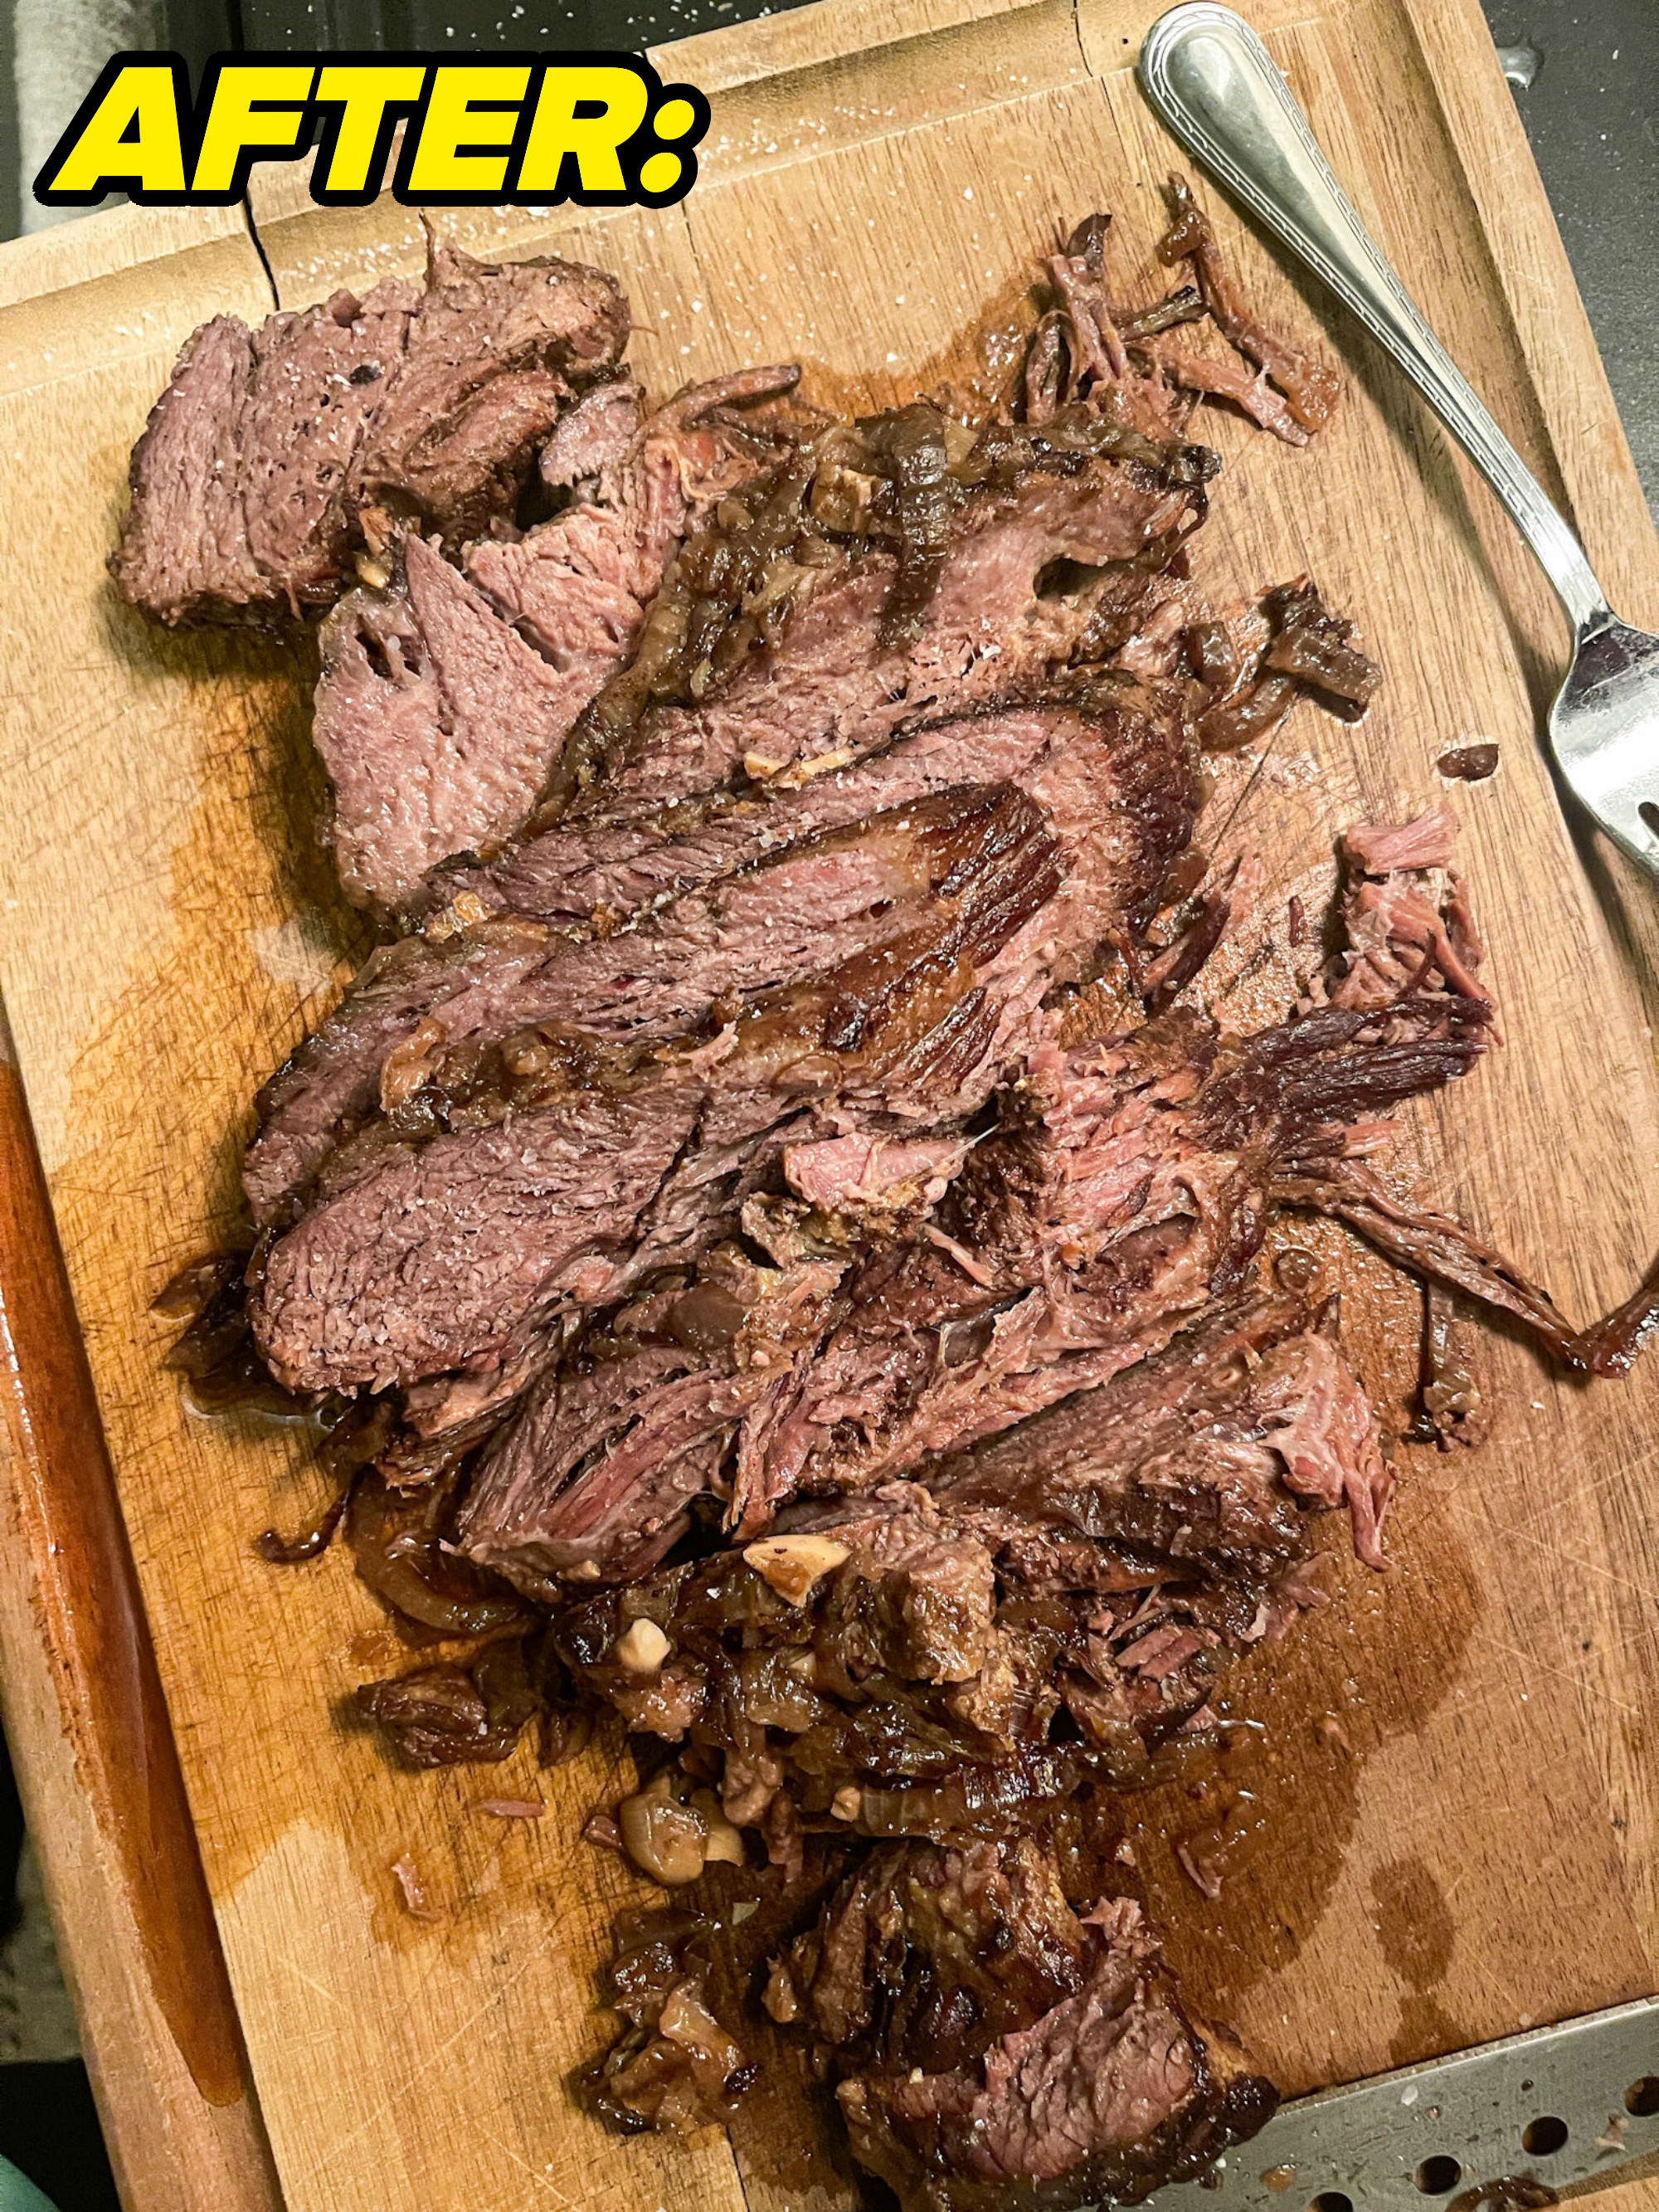 After: brisket sliced on top of a wooden cutting board